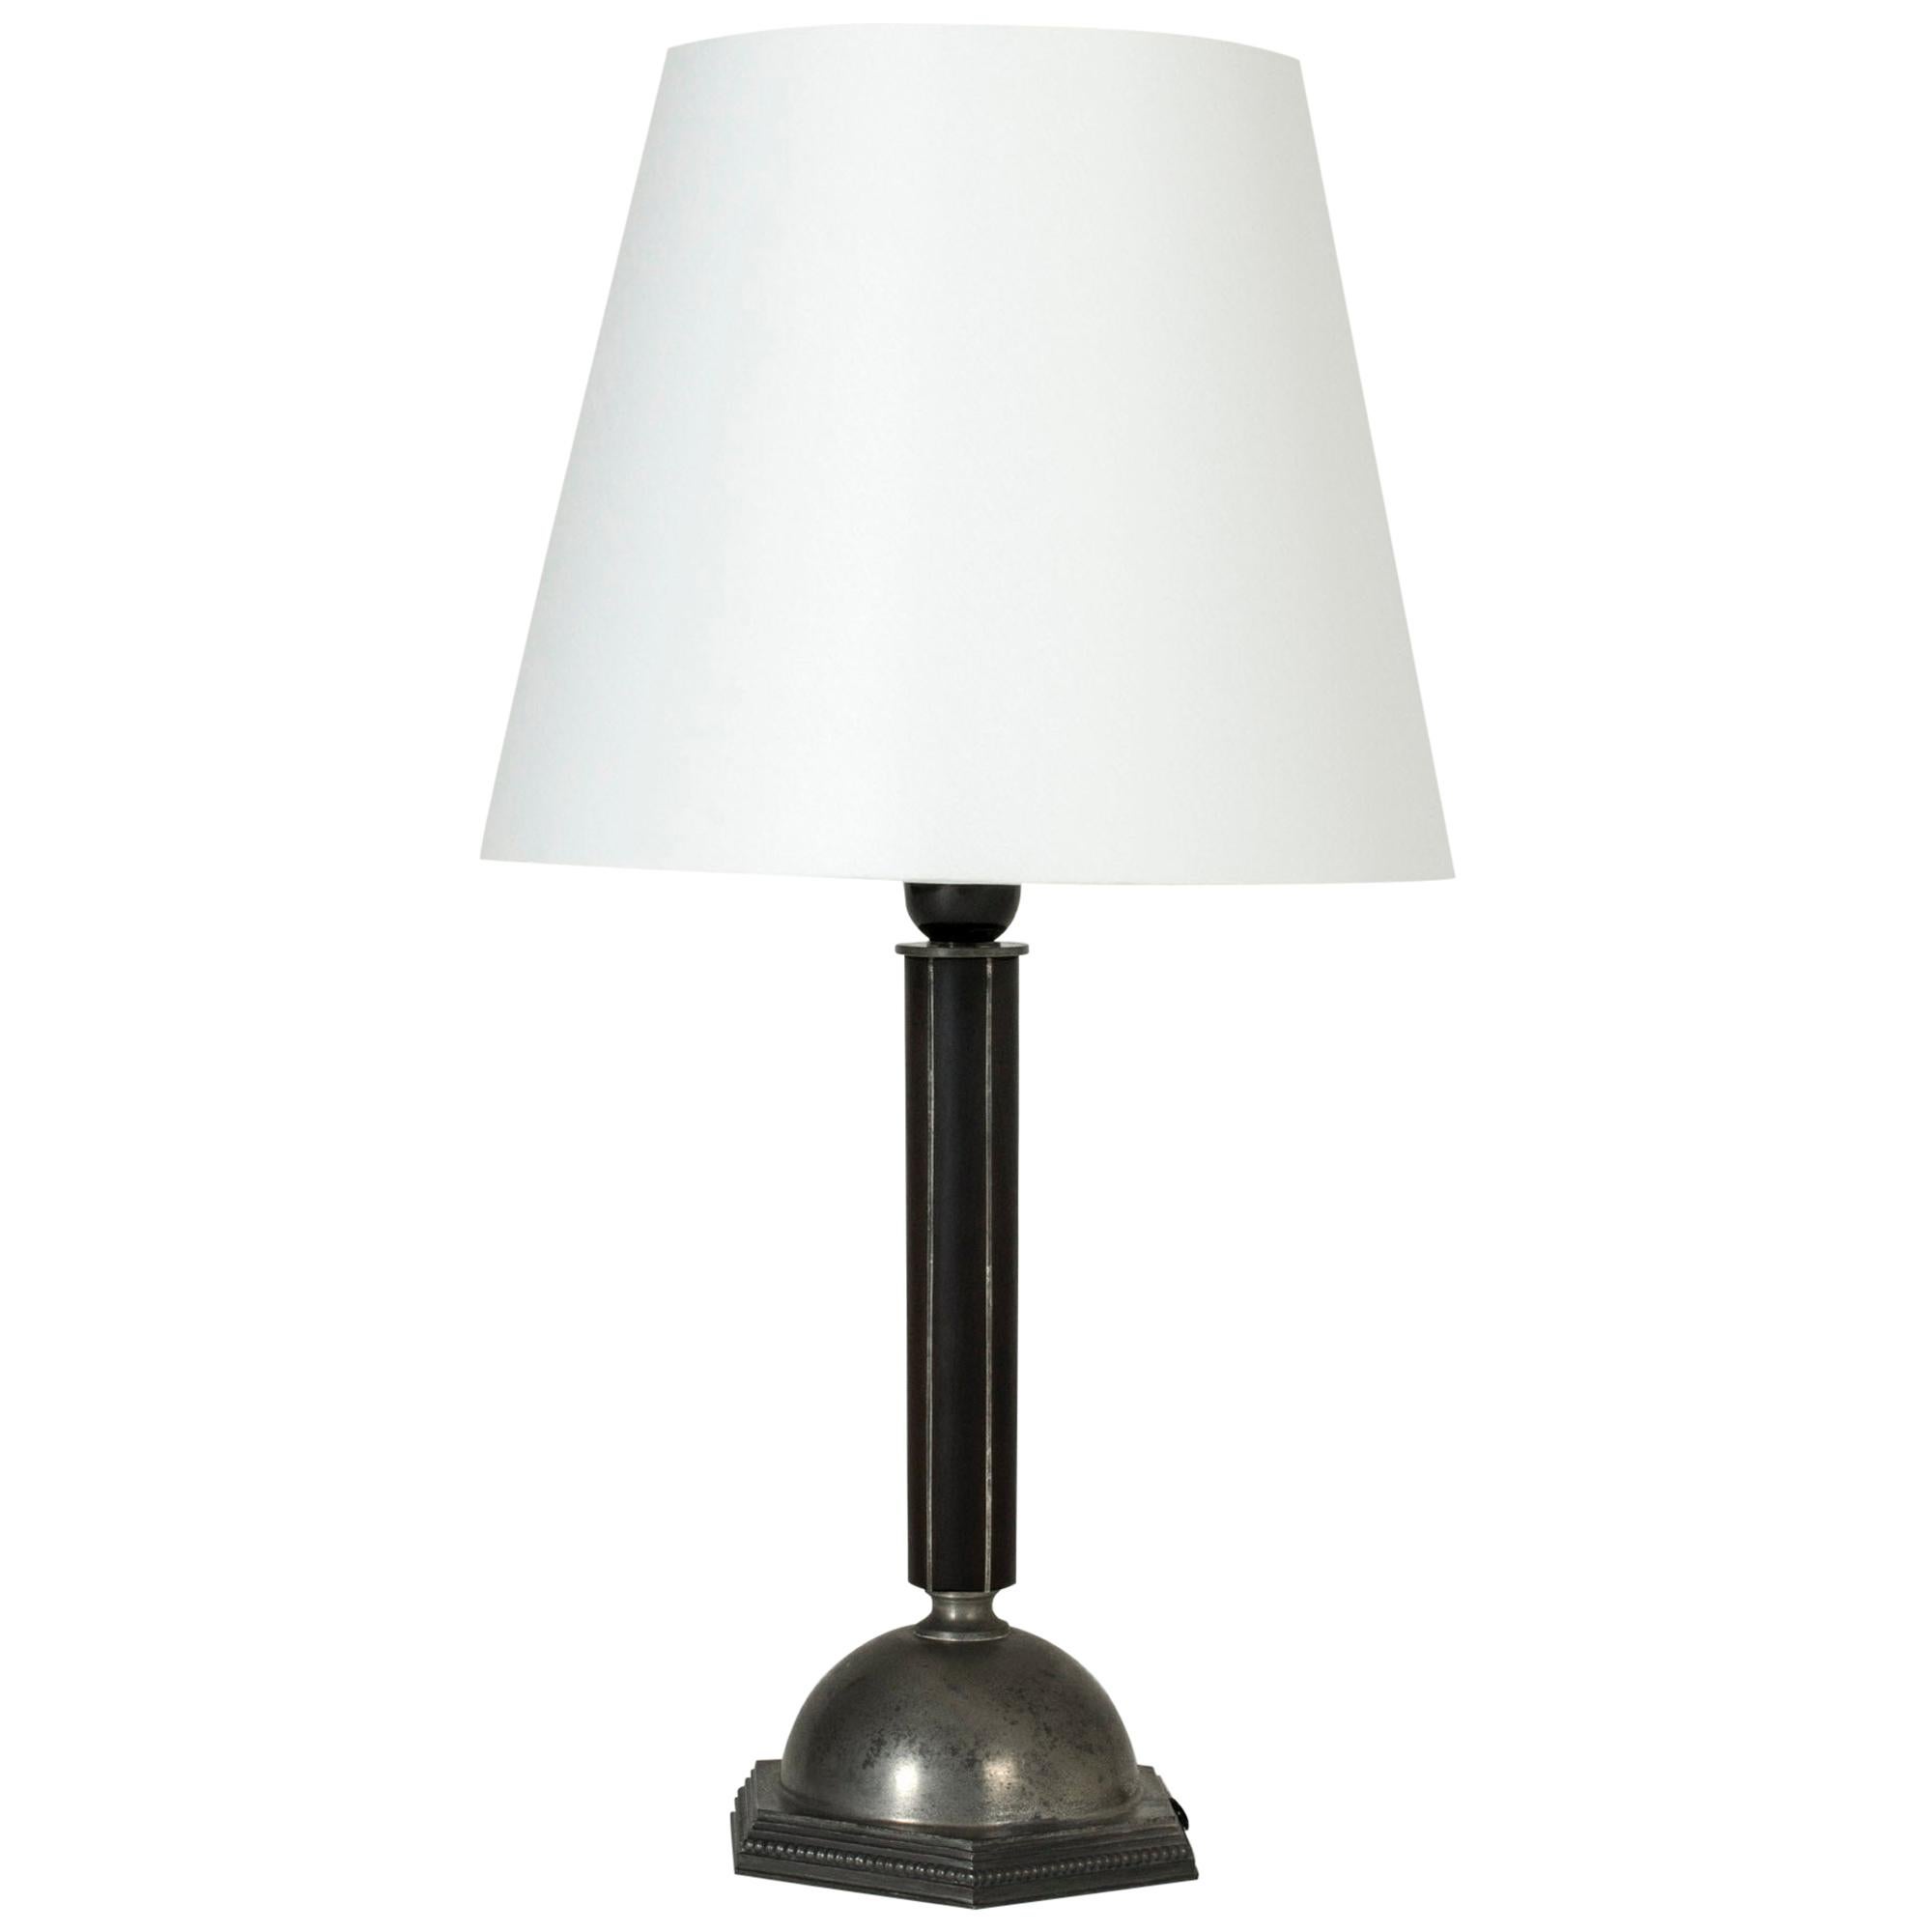 Pewter and Ebony Table Lamp from C. G. Hallberg For Sale